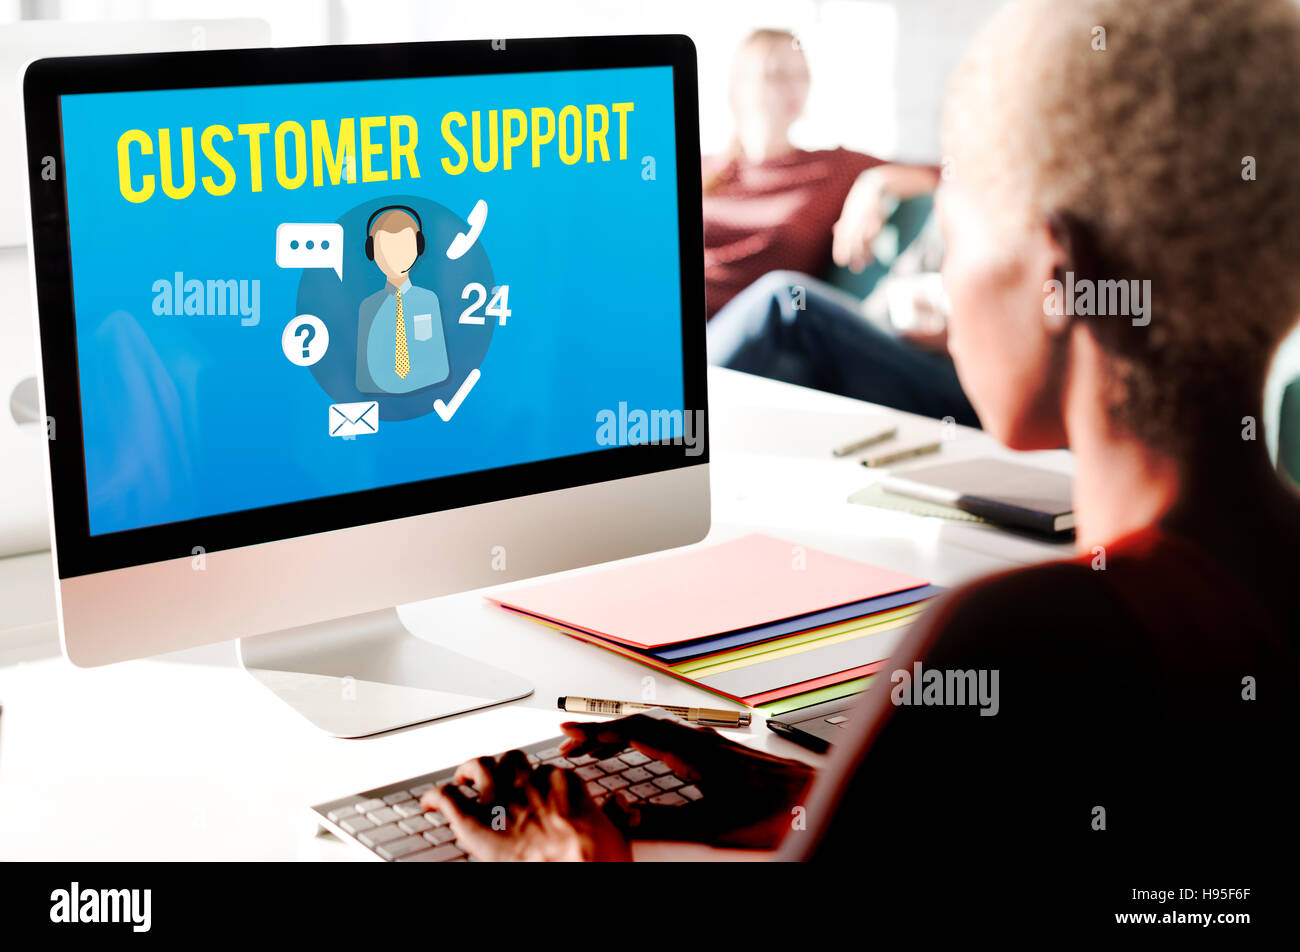 Customer Support Contact Center Advice Concept Stock Photo